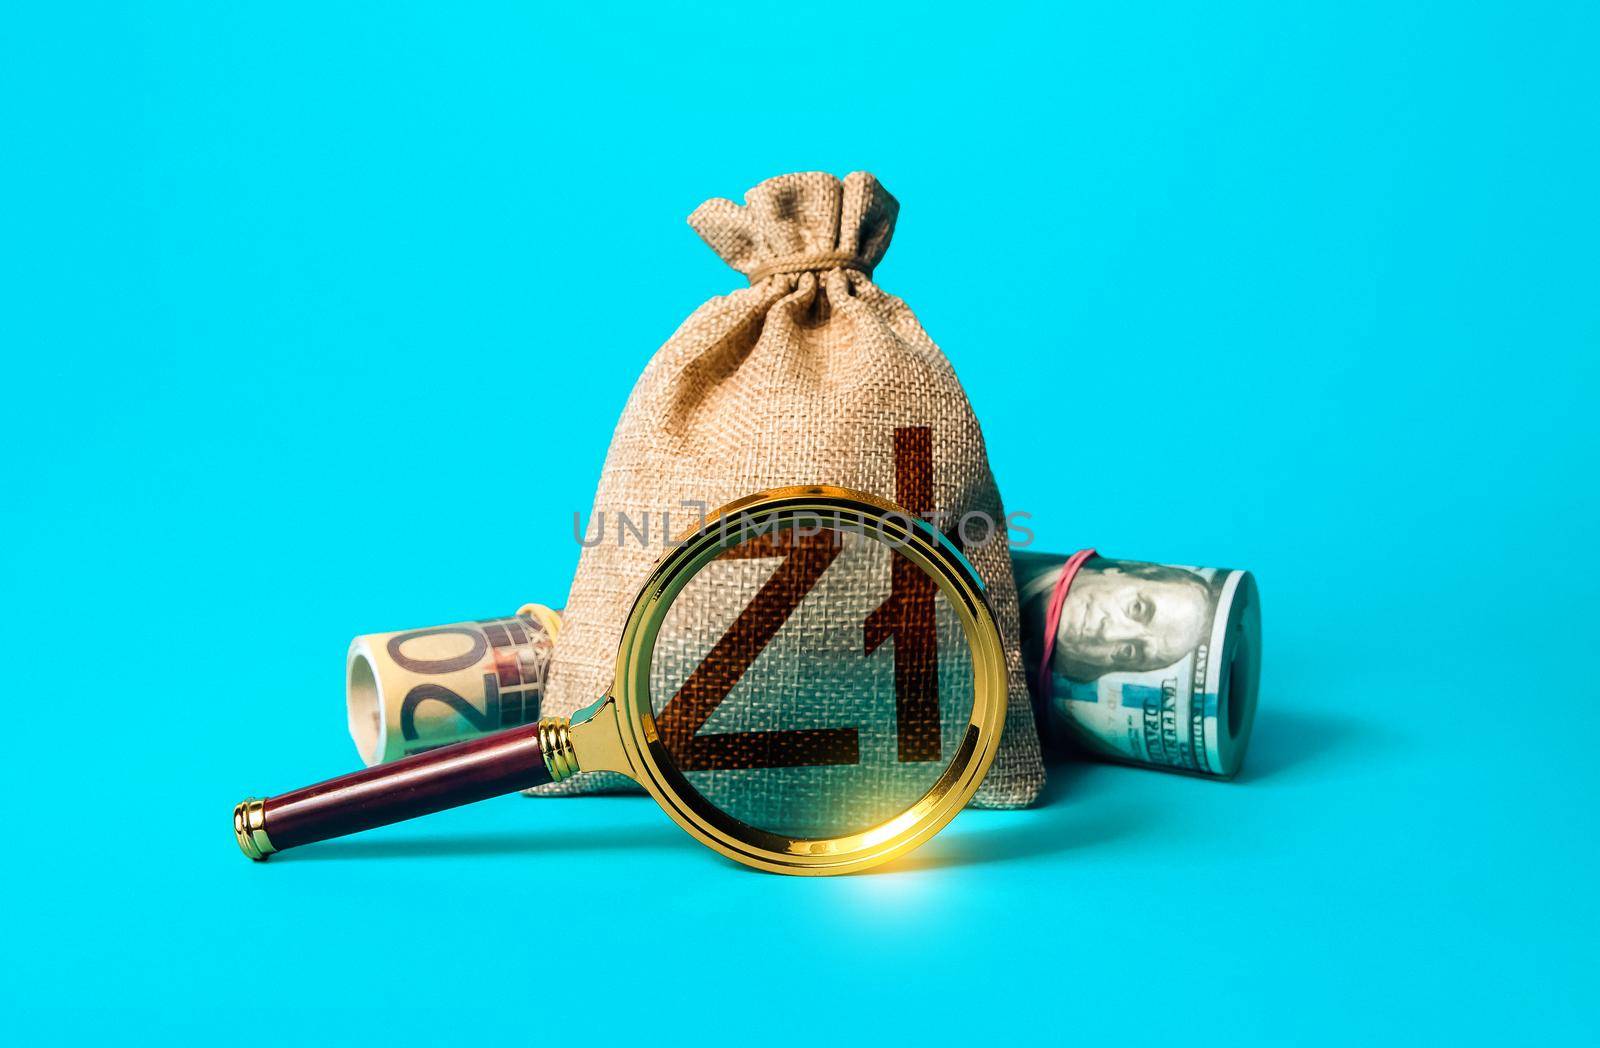 Polish zloty money bag and magnifying glass. Anti money laundering, tax evasion. Deposit or loan terms and conditions. Find investment funds for business project. Investigating capital origins.